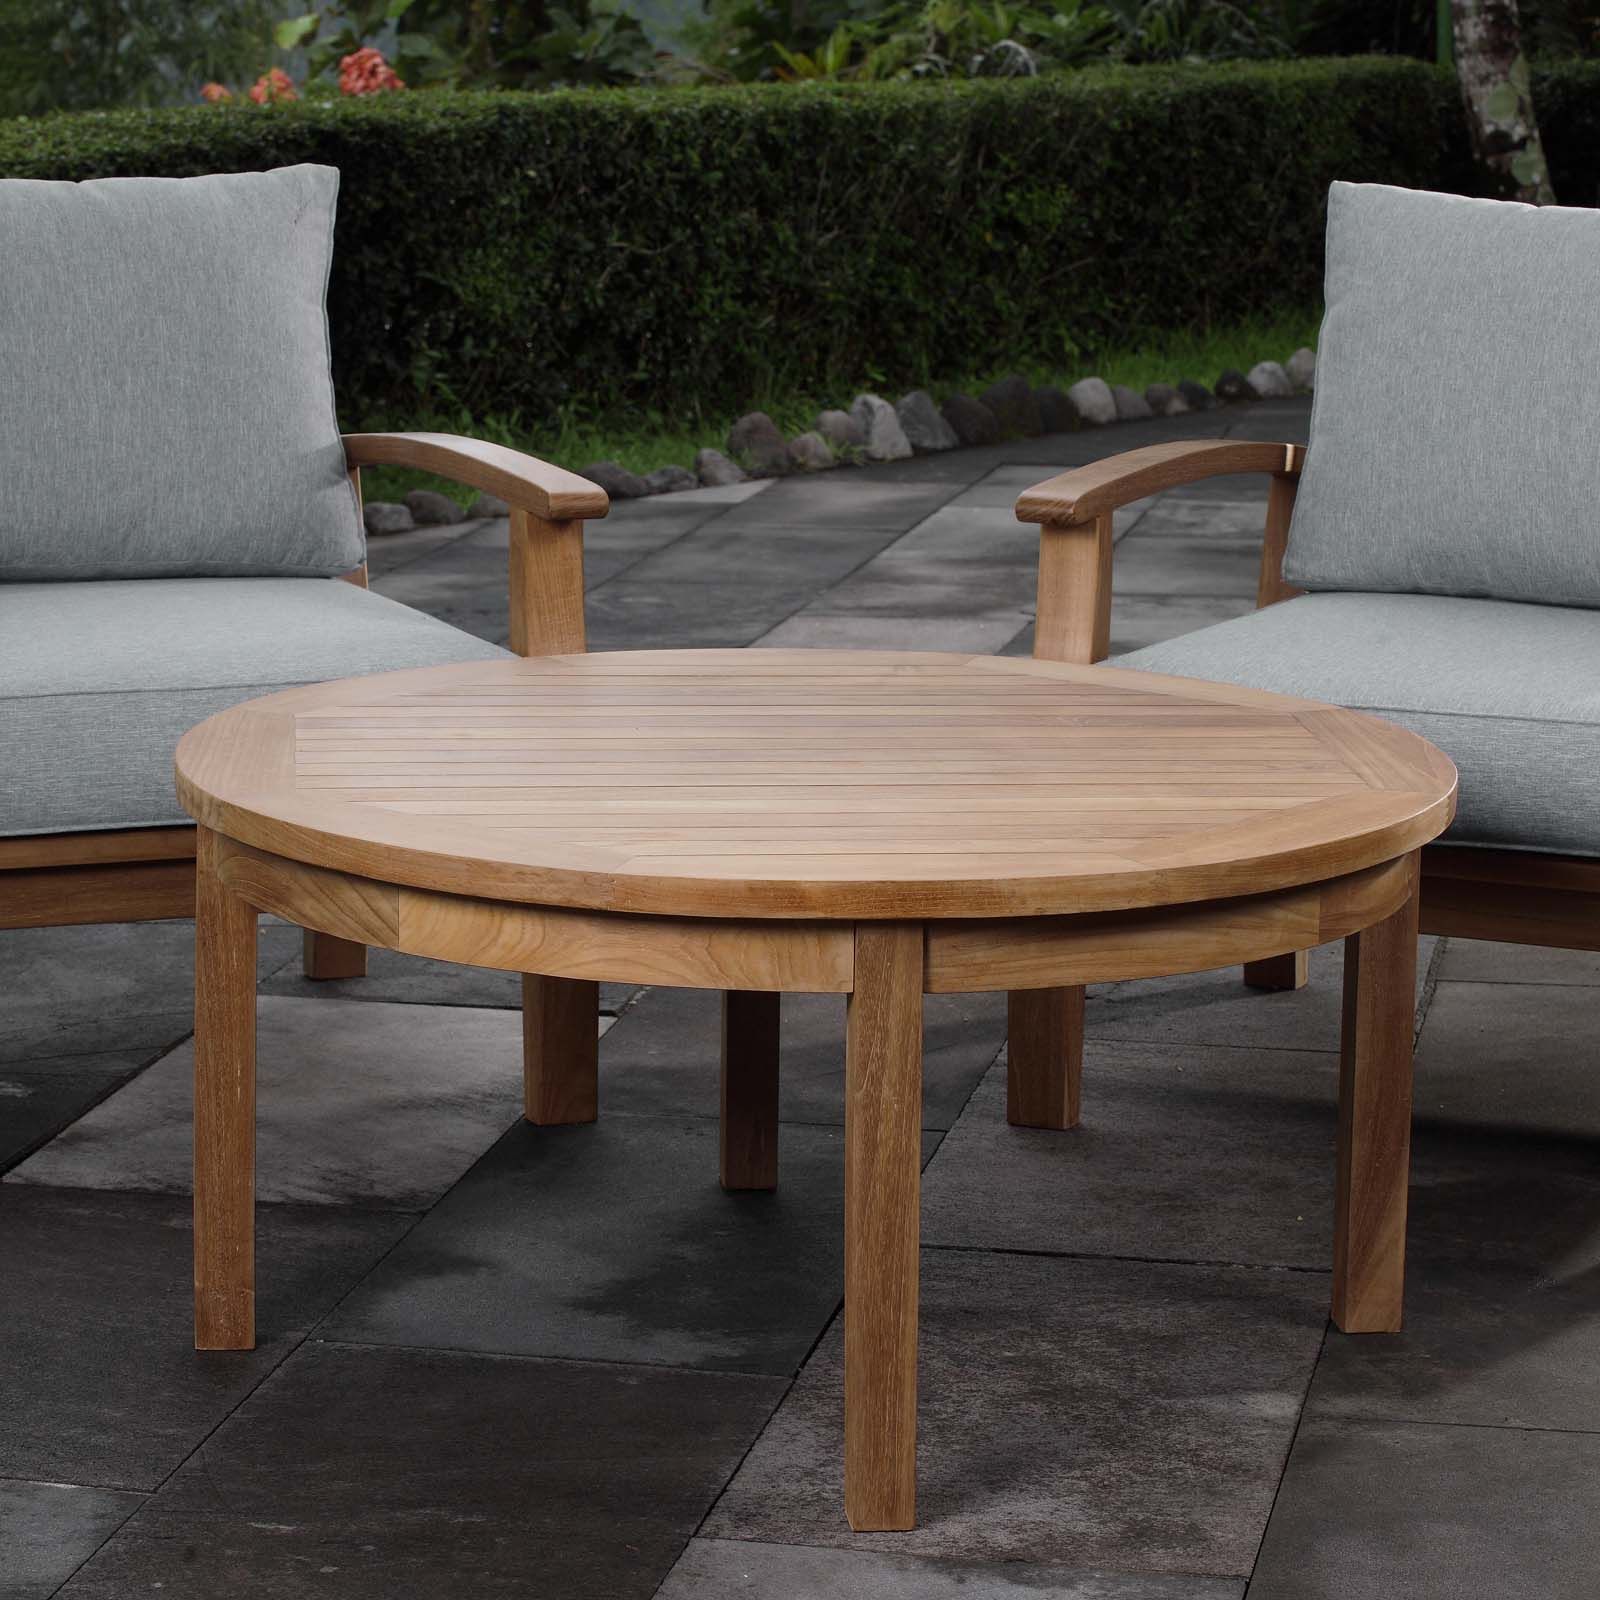 Preferred Marina Outdoor Patio Teak Round Coffee Table Natural Inside Round Coffee Tables (View 2 of 20)